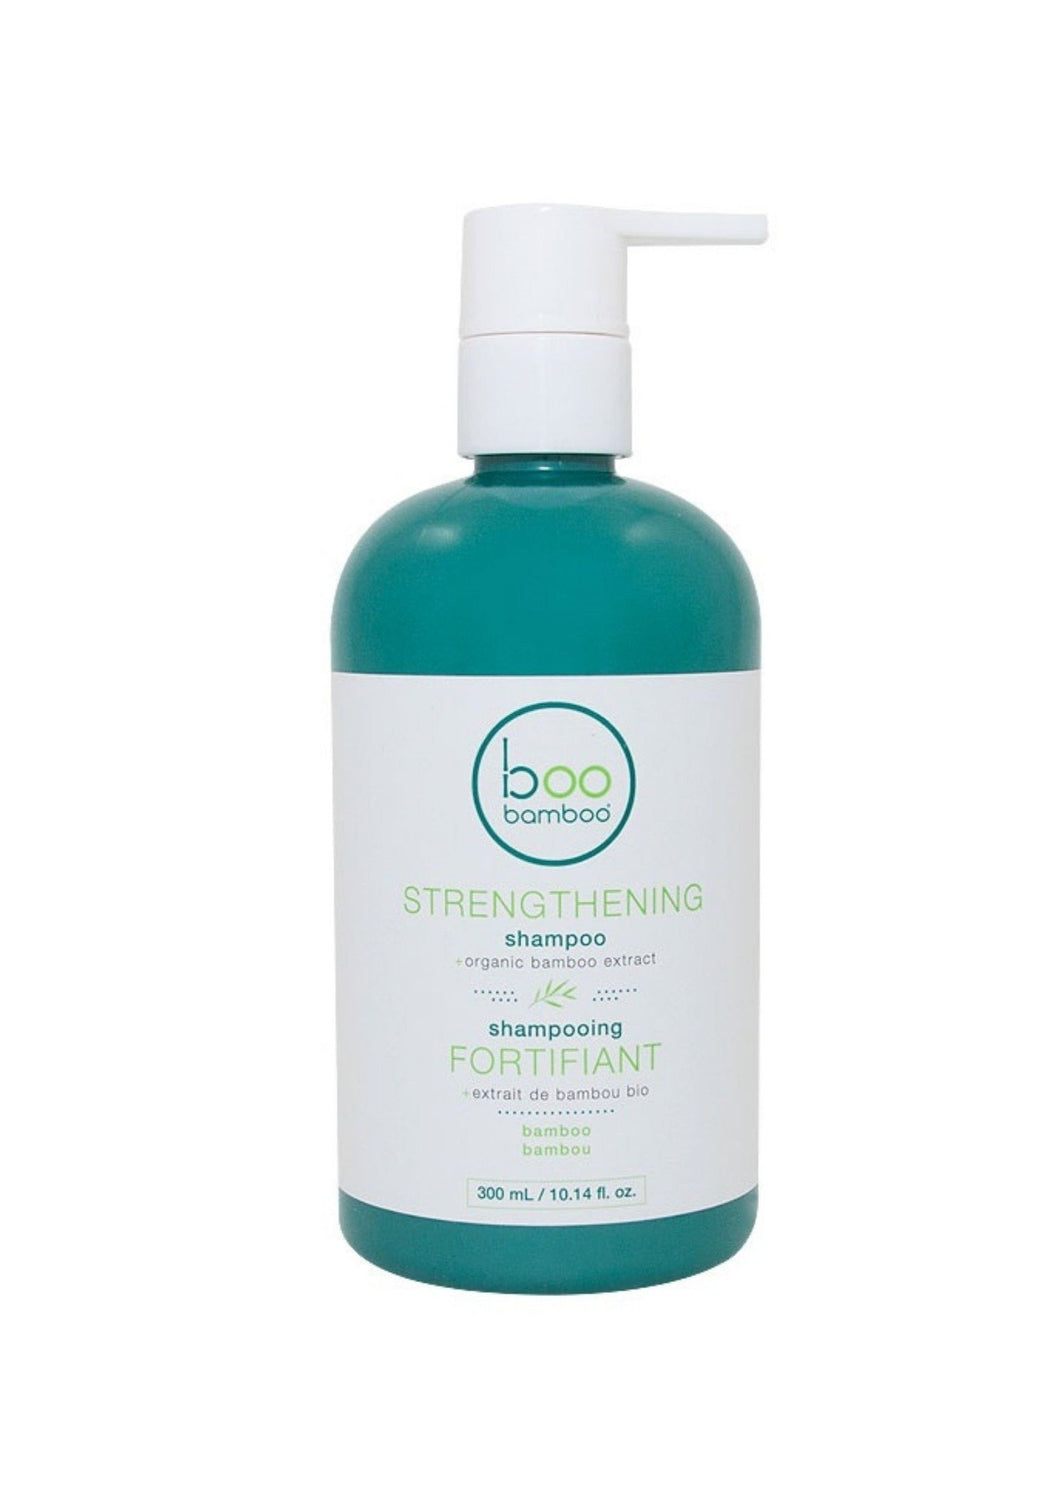 Say goodbye to weak and brittle hair with boo bamboo Strengthening Shampoo! The bamboo enriched formula drenches your hair in organic protein and silica, to help strengthen hair strands and create brilliant shine. Formulated to protect against UV damage, our colour safe formula leaves you with incredibly soft, healthier looking hair. 300ml $13.00